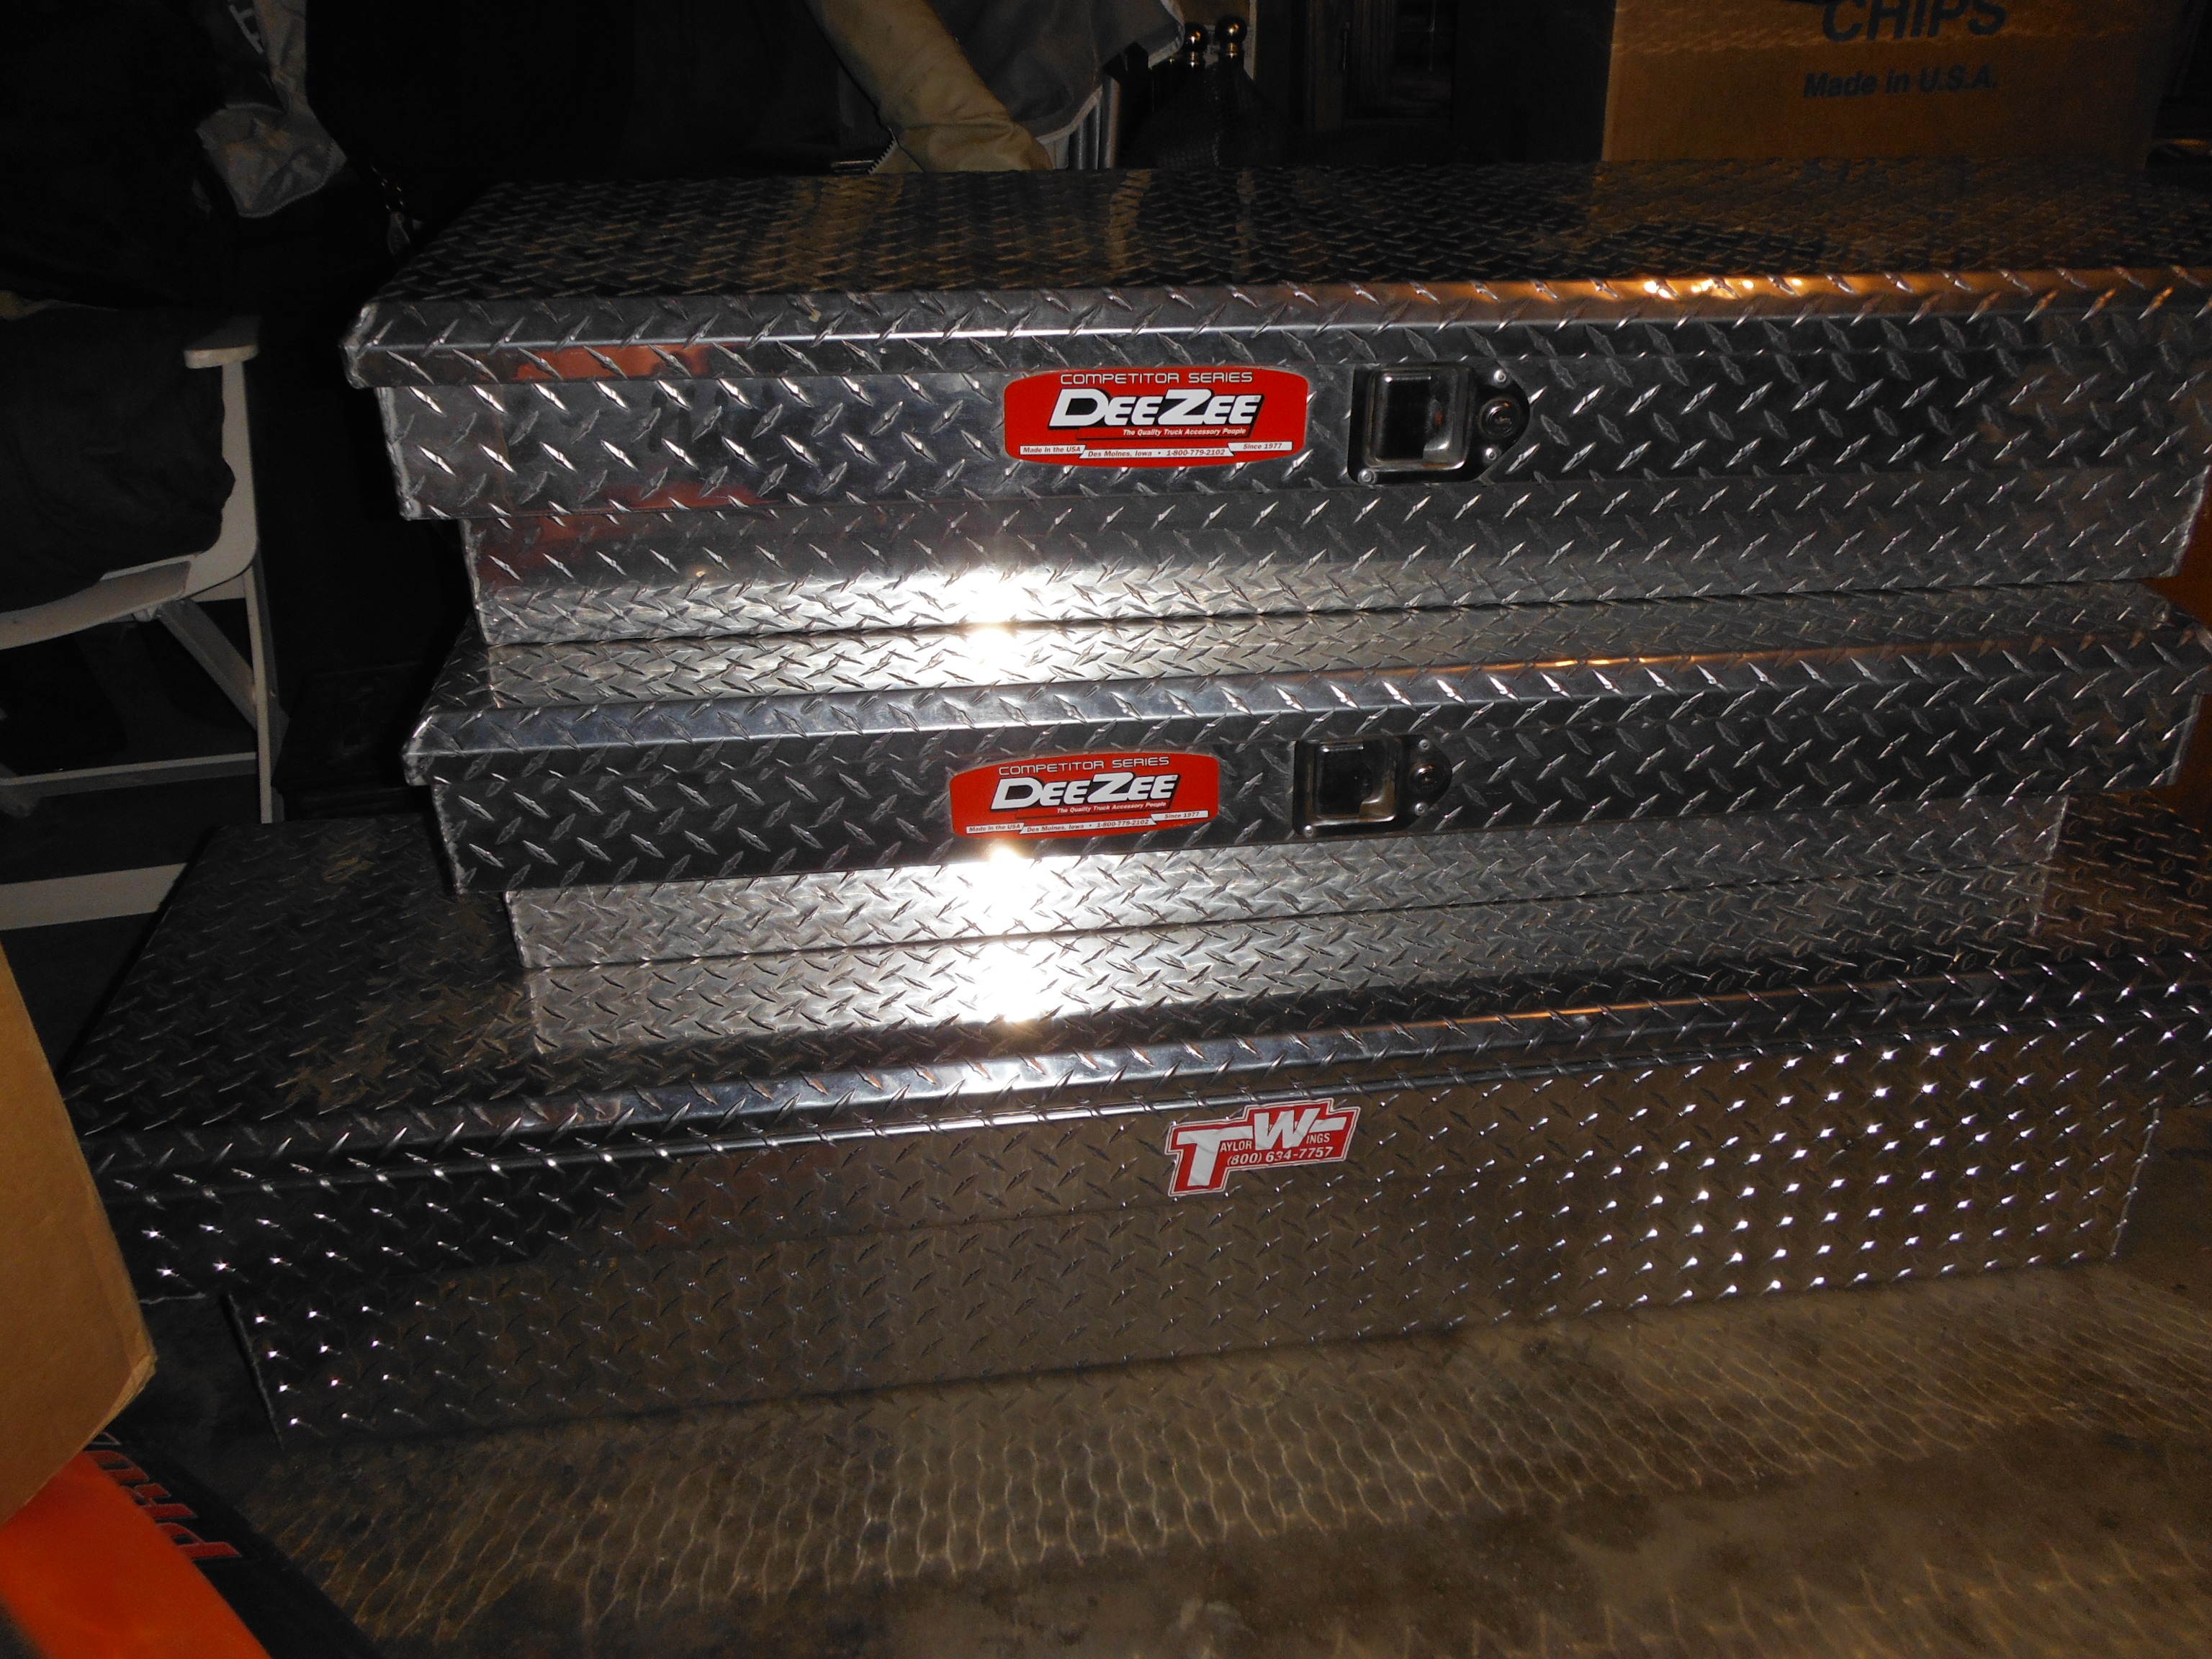 NEW -Three Aluminum Truck Bed Tool Boxes off a new Toyoda Tundra